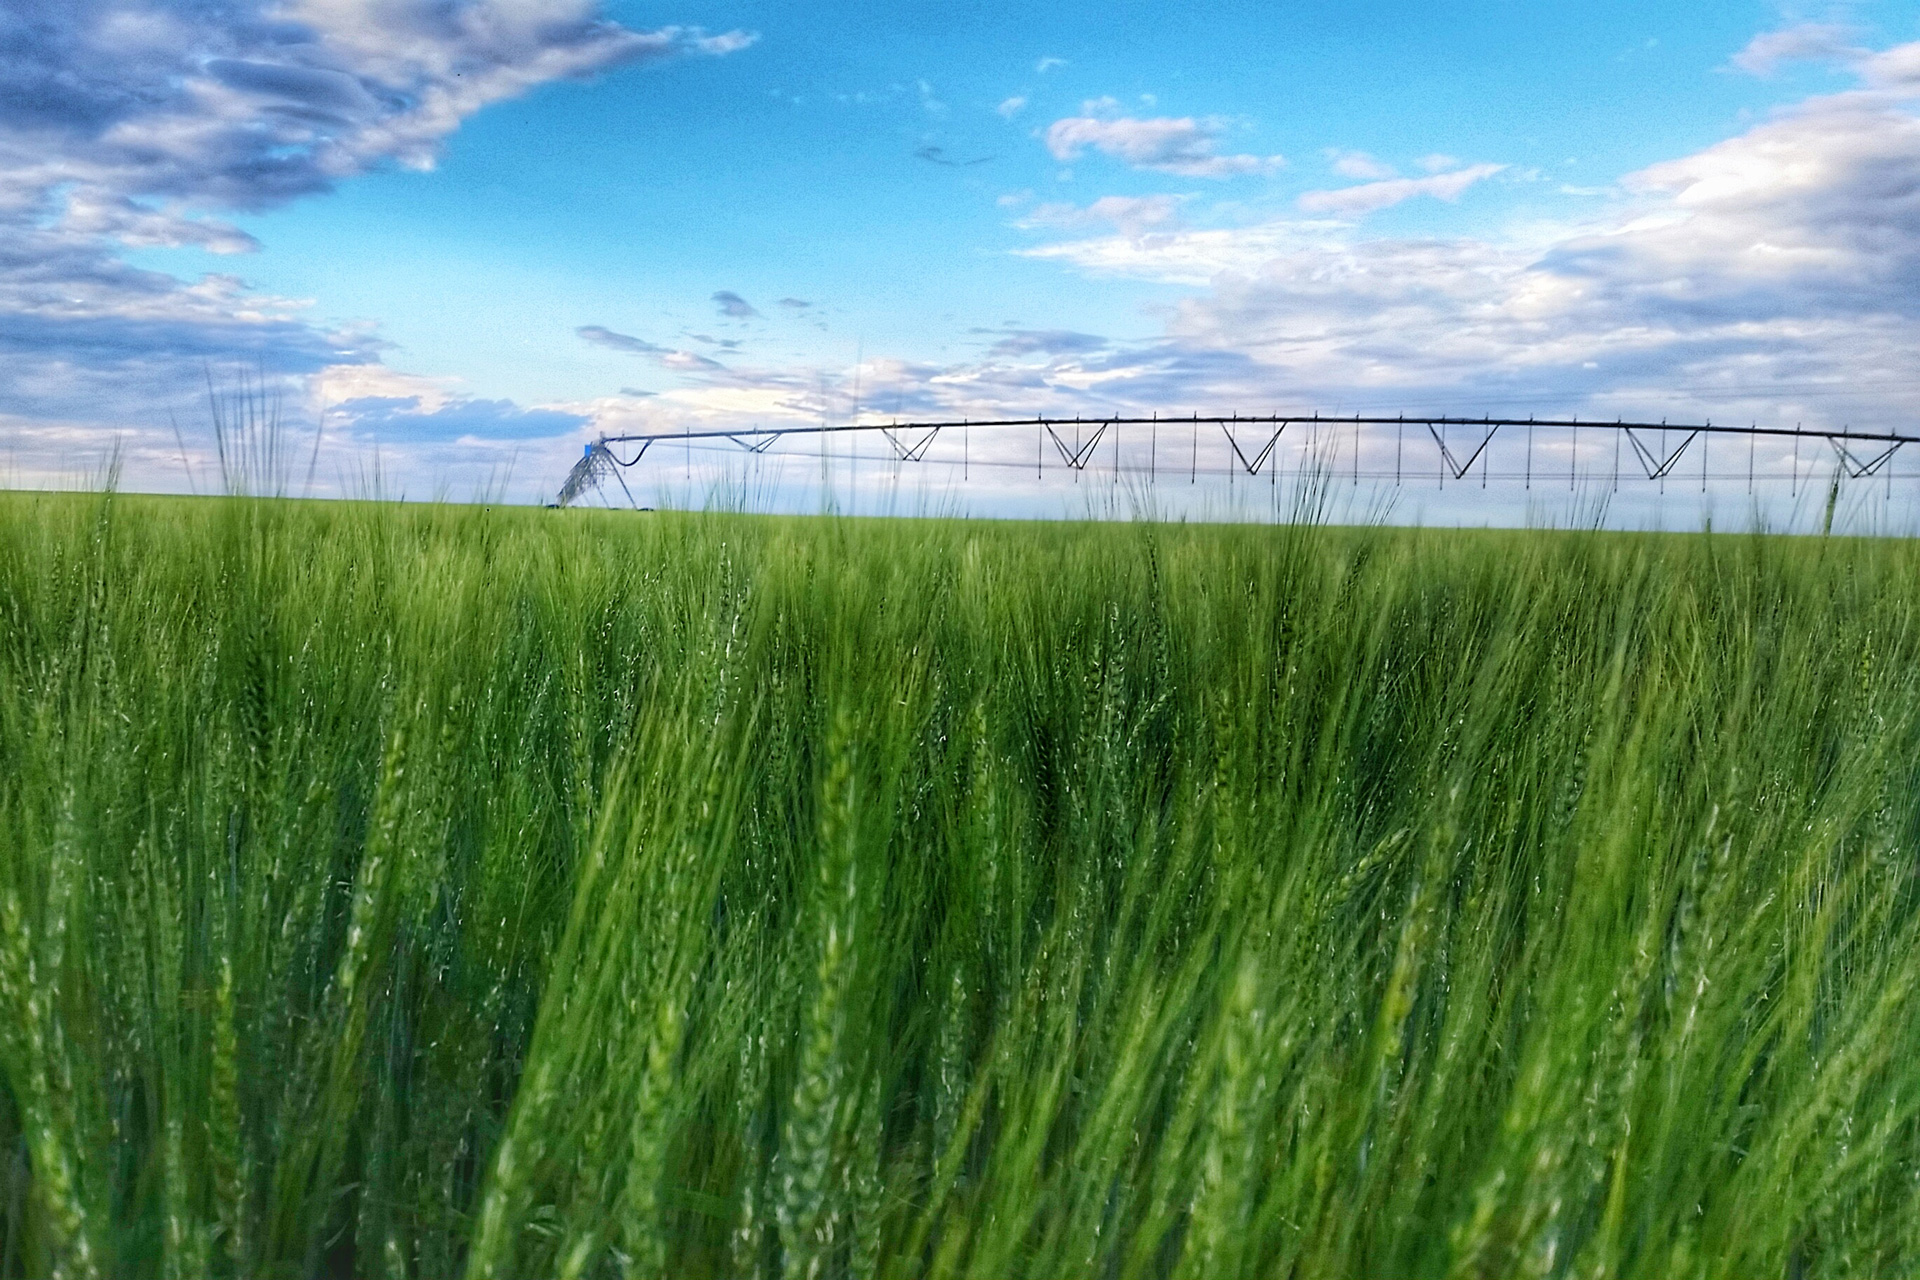 Field of green grains with a center pivot sprinkler in the background